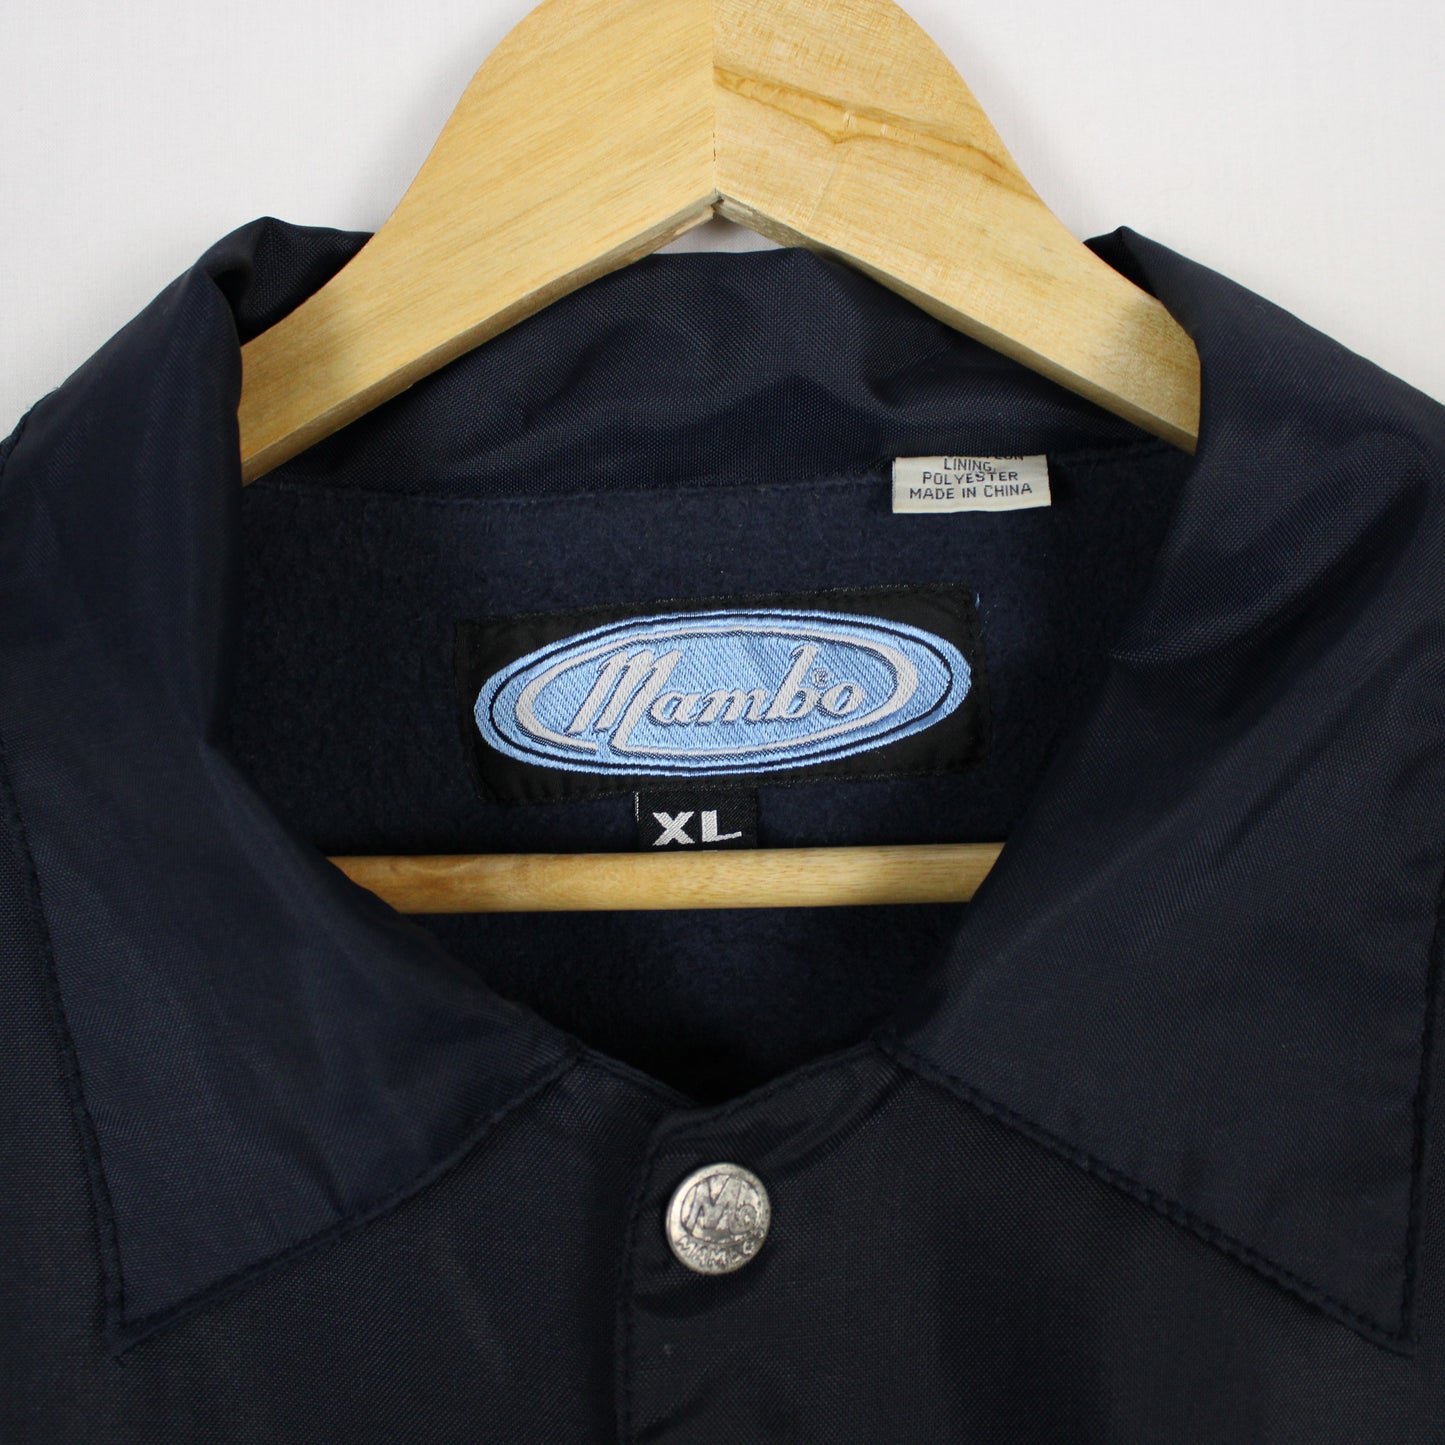 Vintage 1995 Mambo Stagmasters Coach Jacket - XL